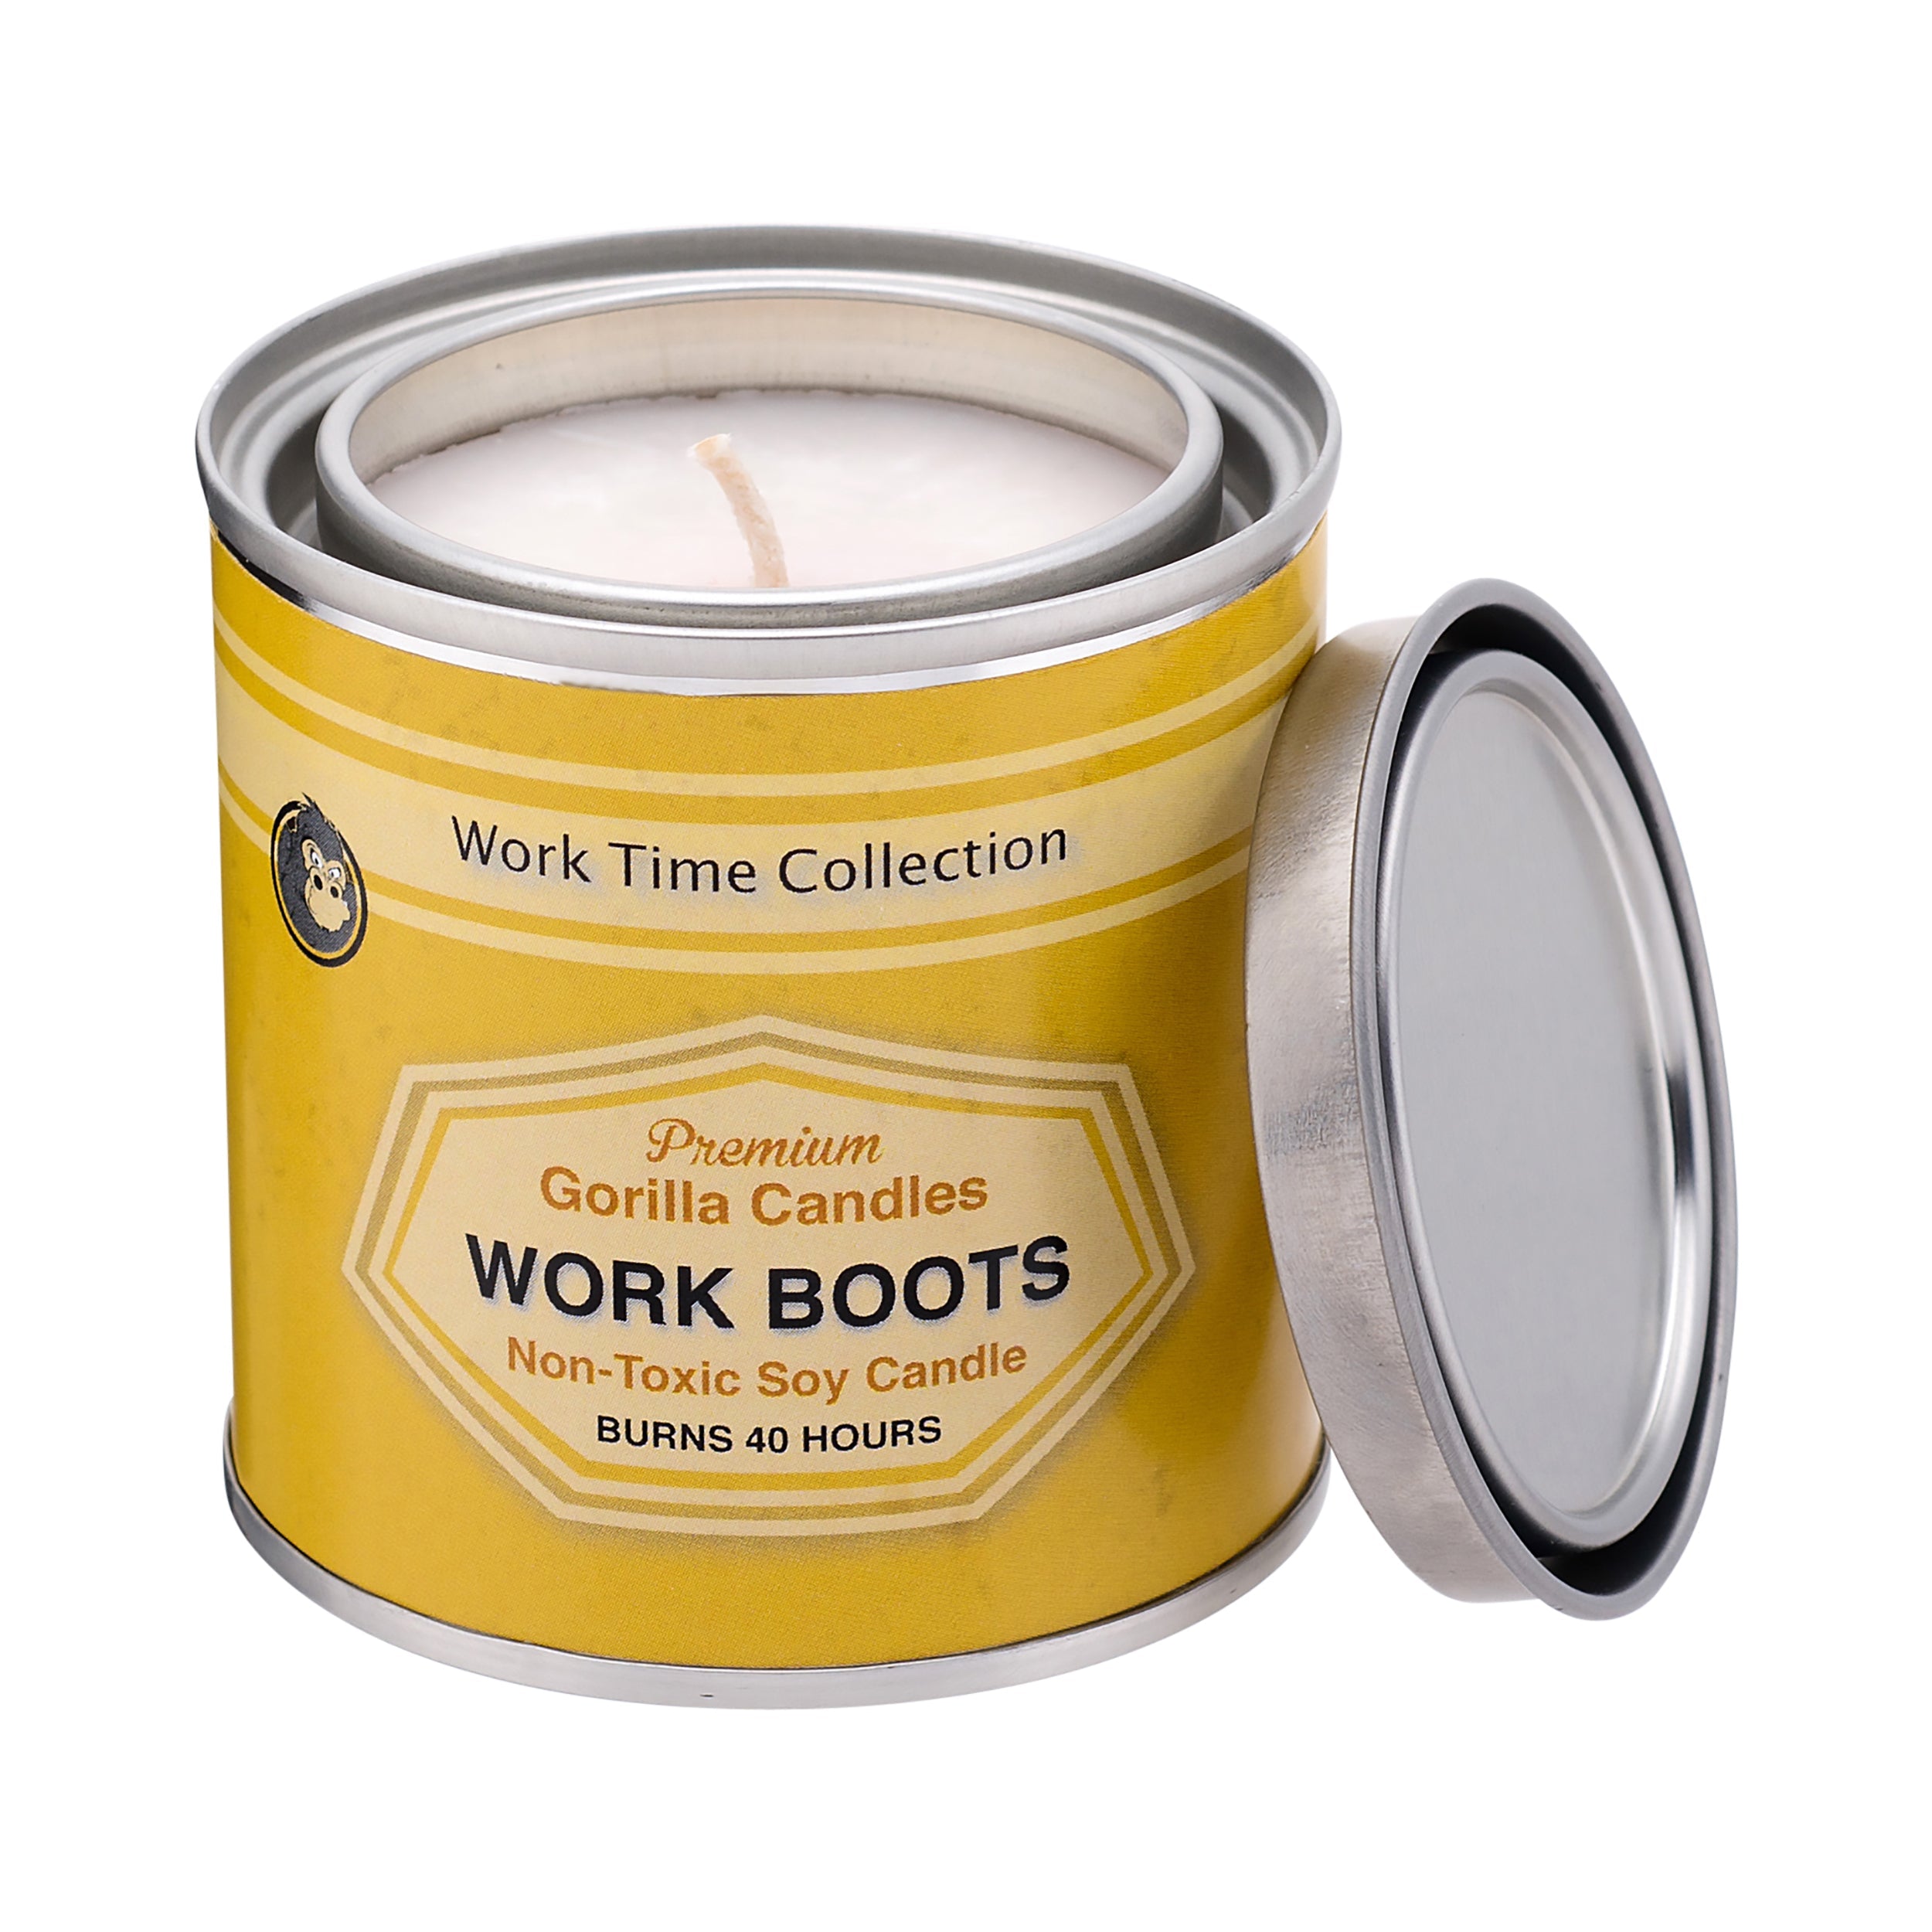 New Leather Work Boots by Gorilla Candles™